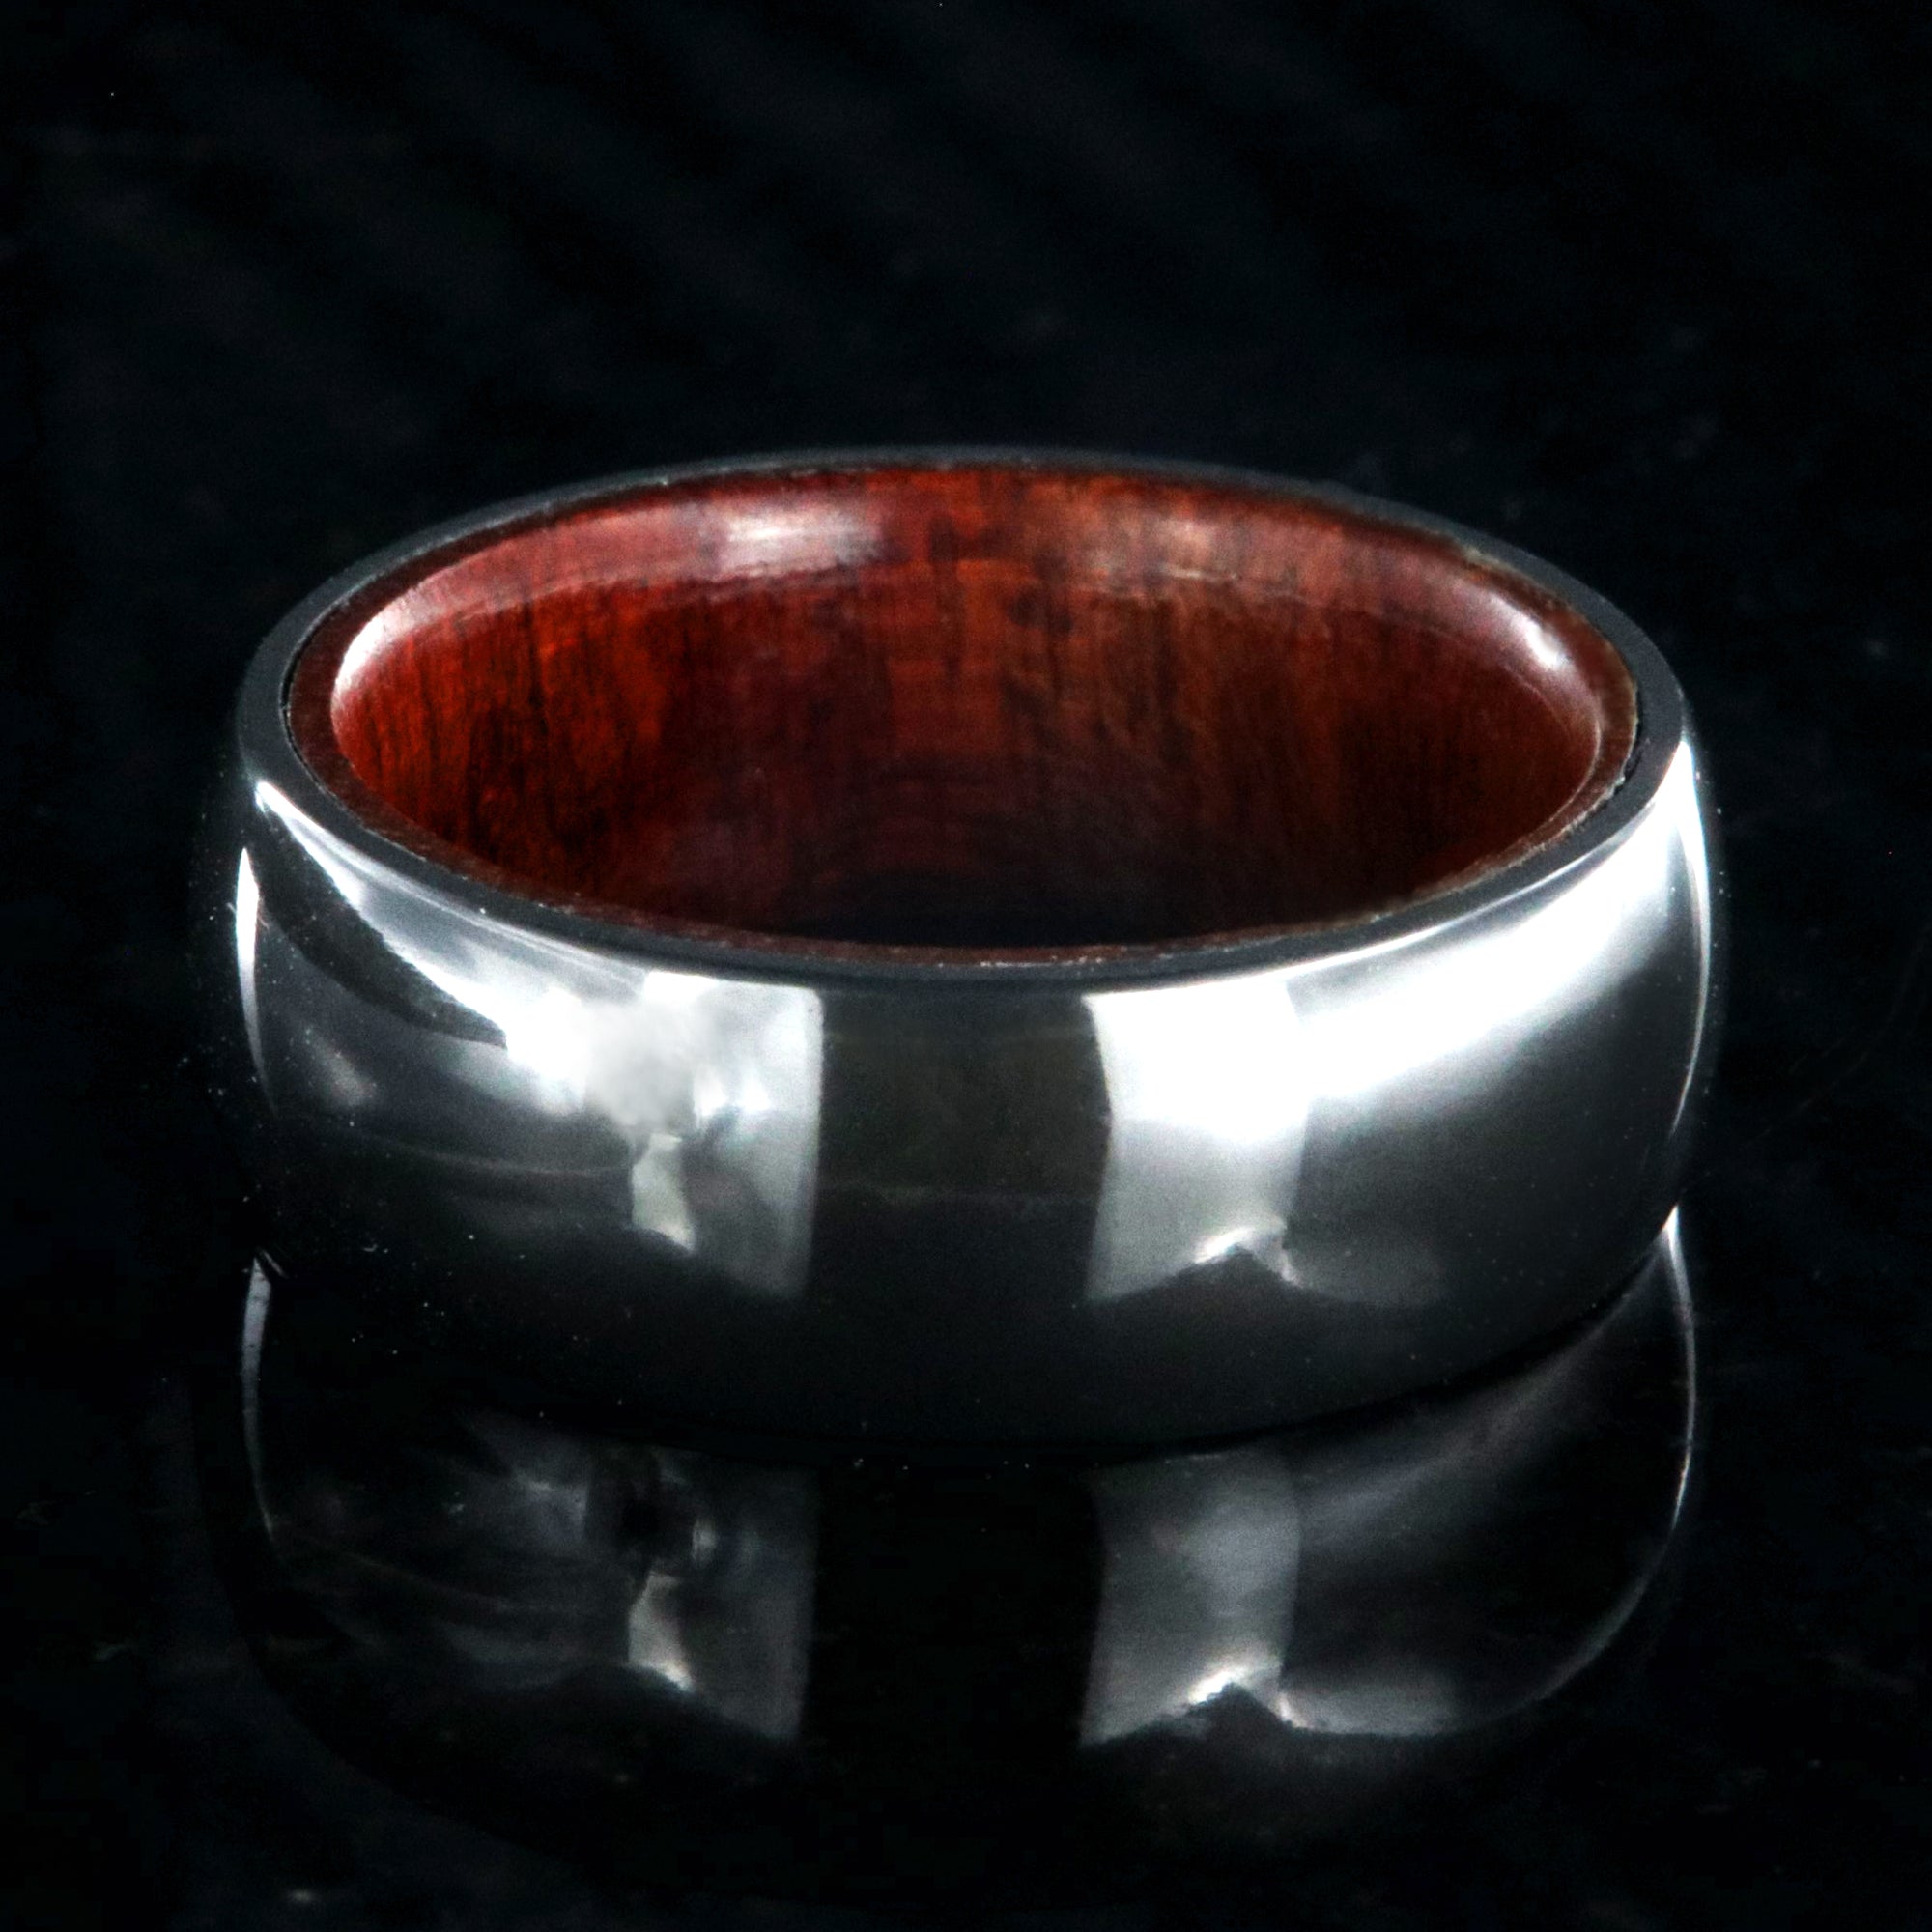 8mm wide black zirconium ring with a polish finish and bloodwood sleeve